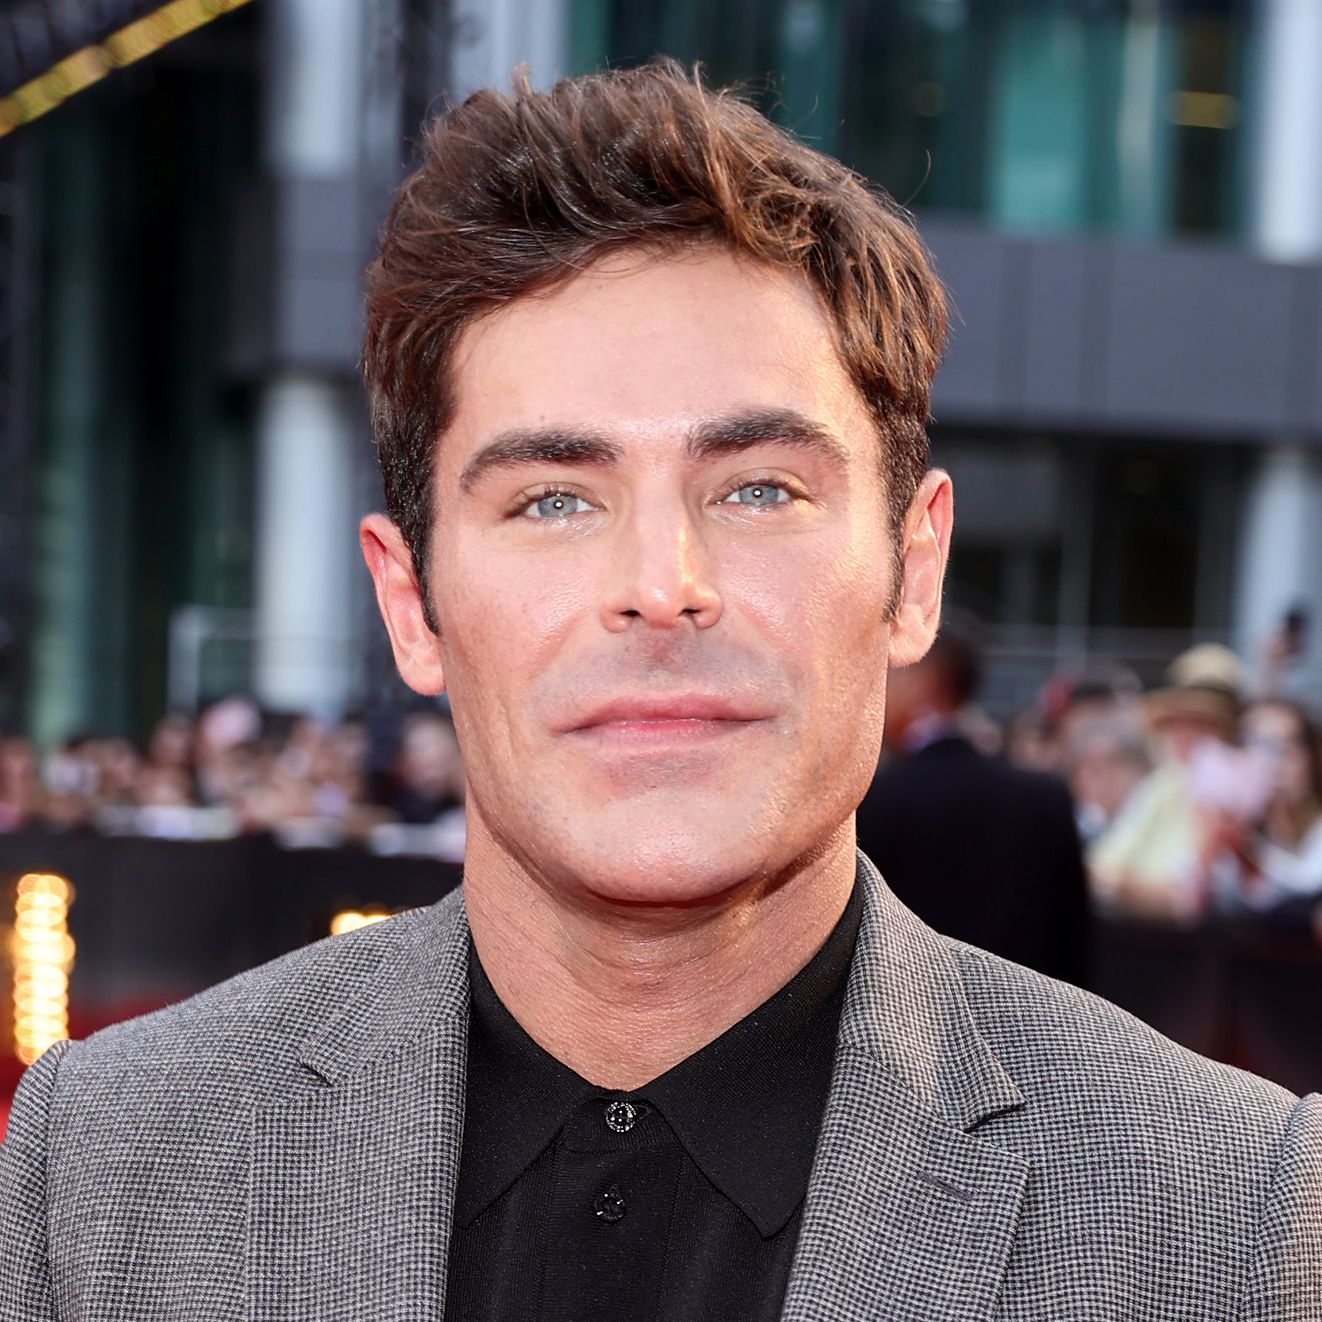 håndtag Inficere mus eller rotte Zac Efron Says He 'Almost Died' After Shattering His Jaw